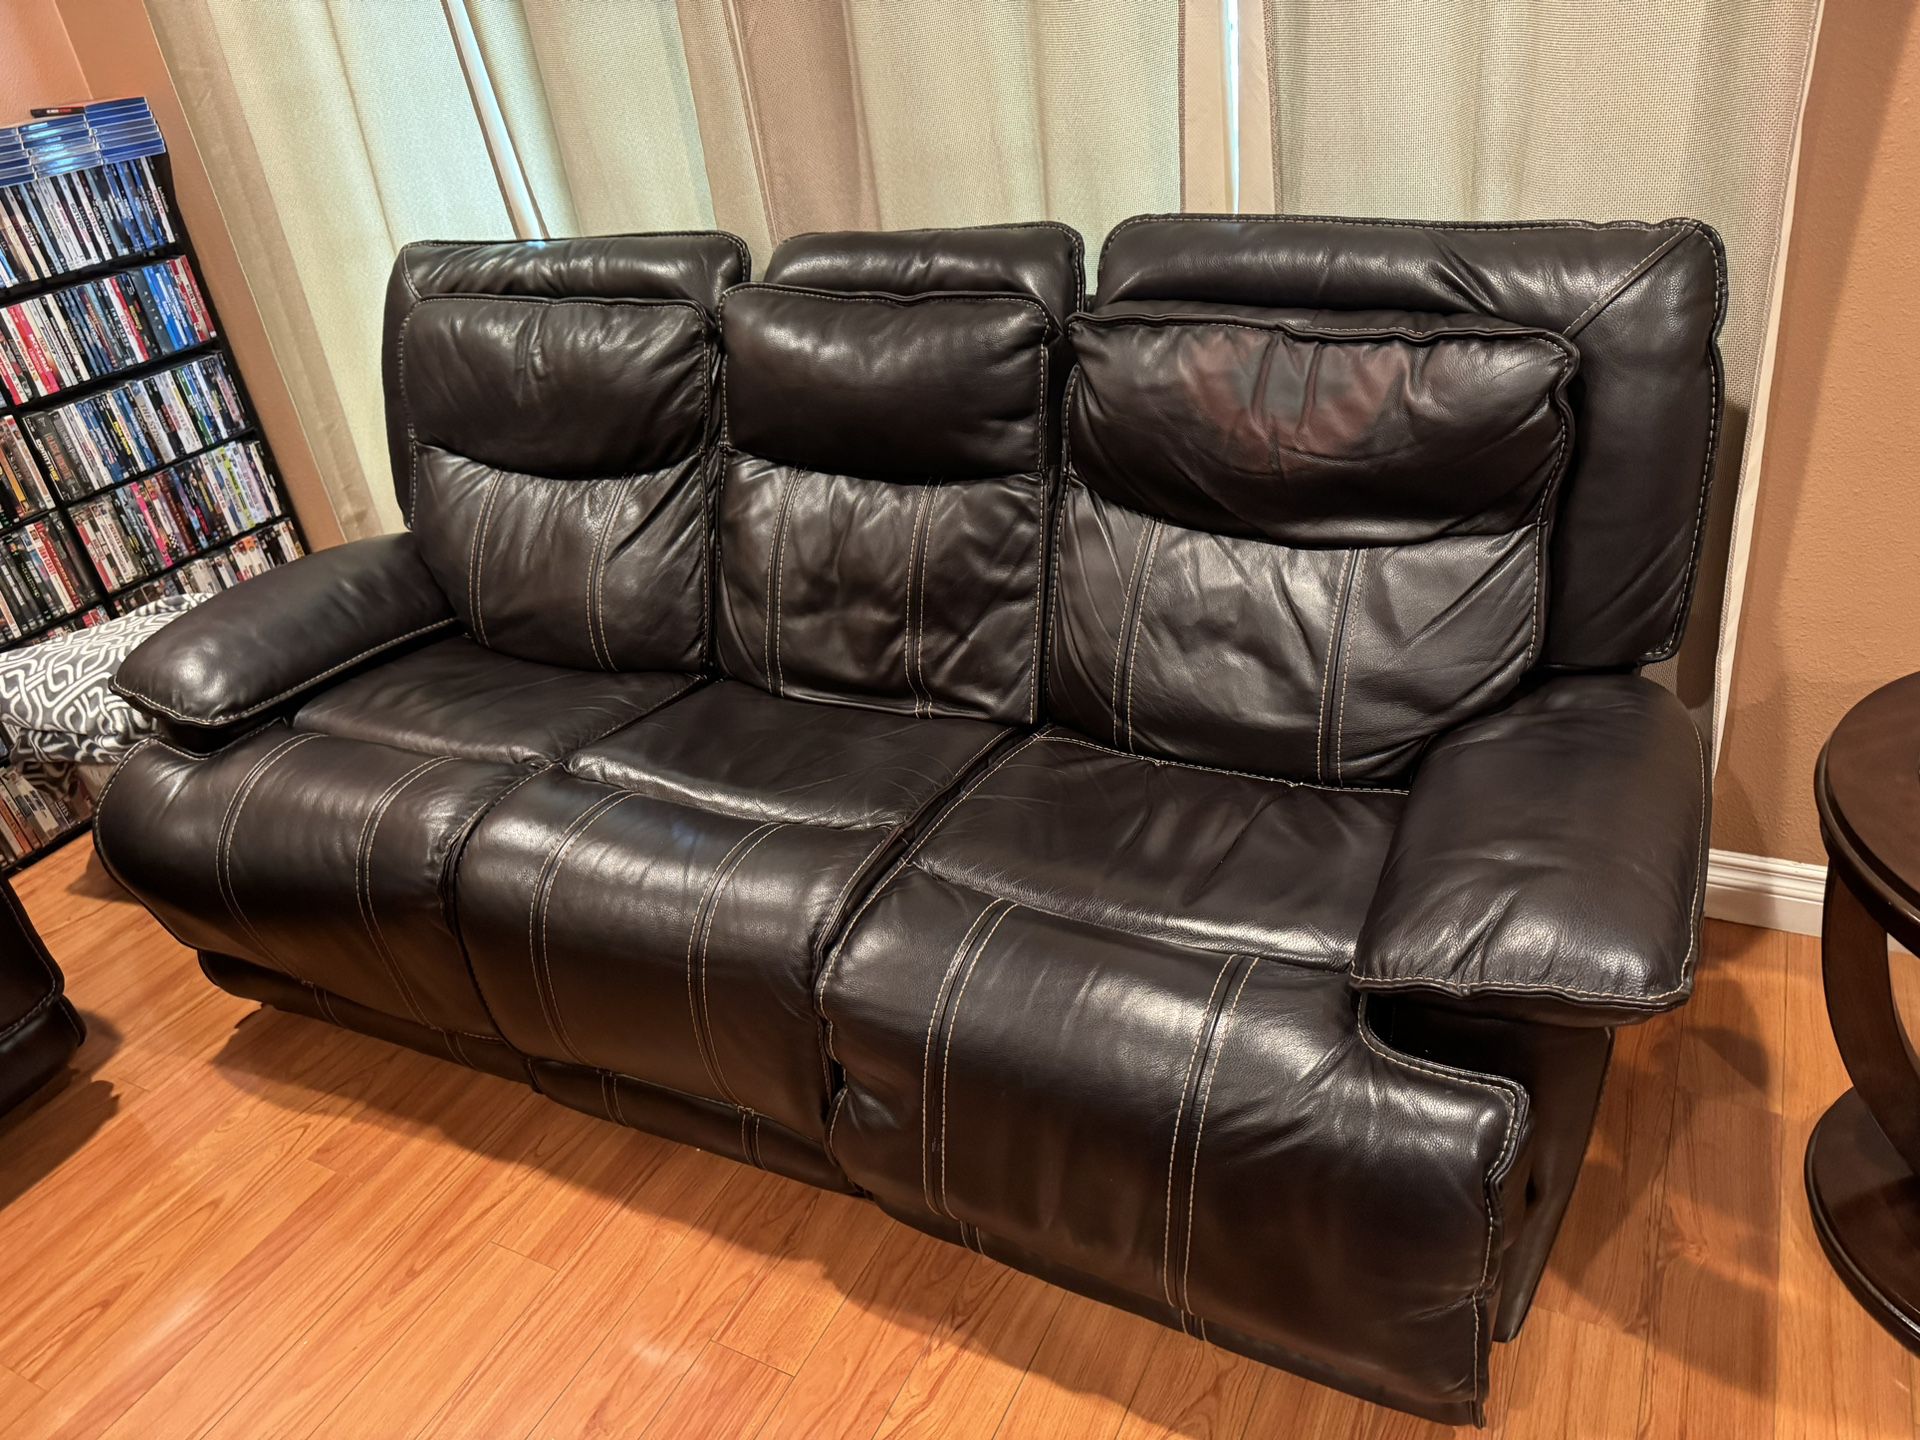 Sofas / recliners